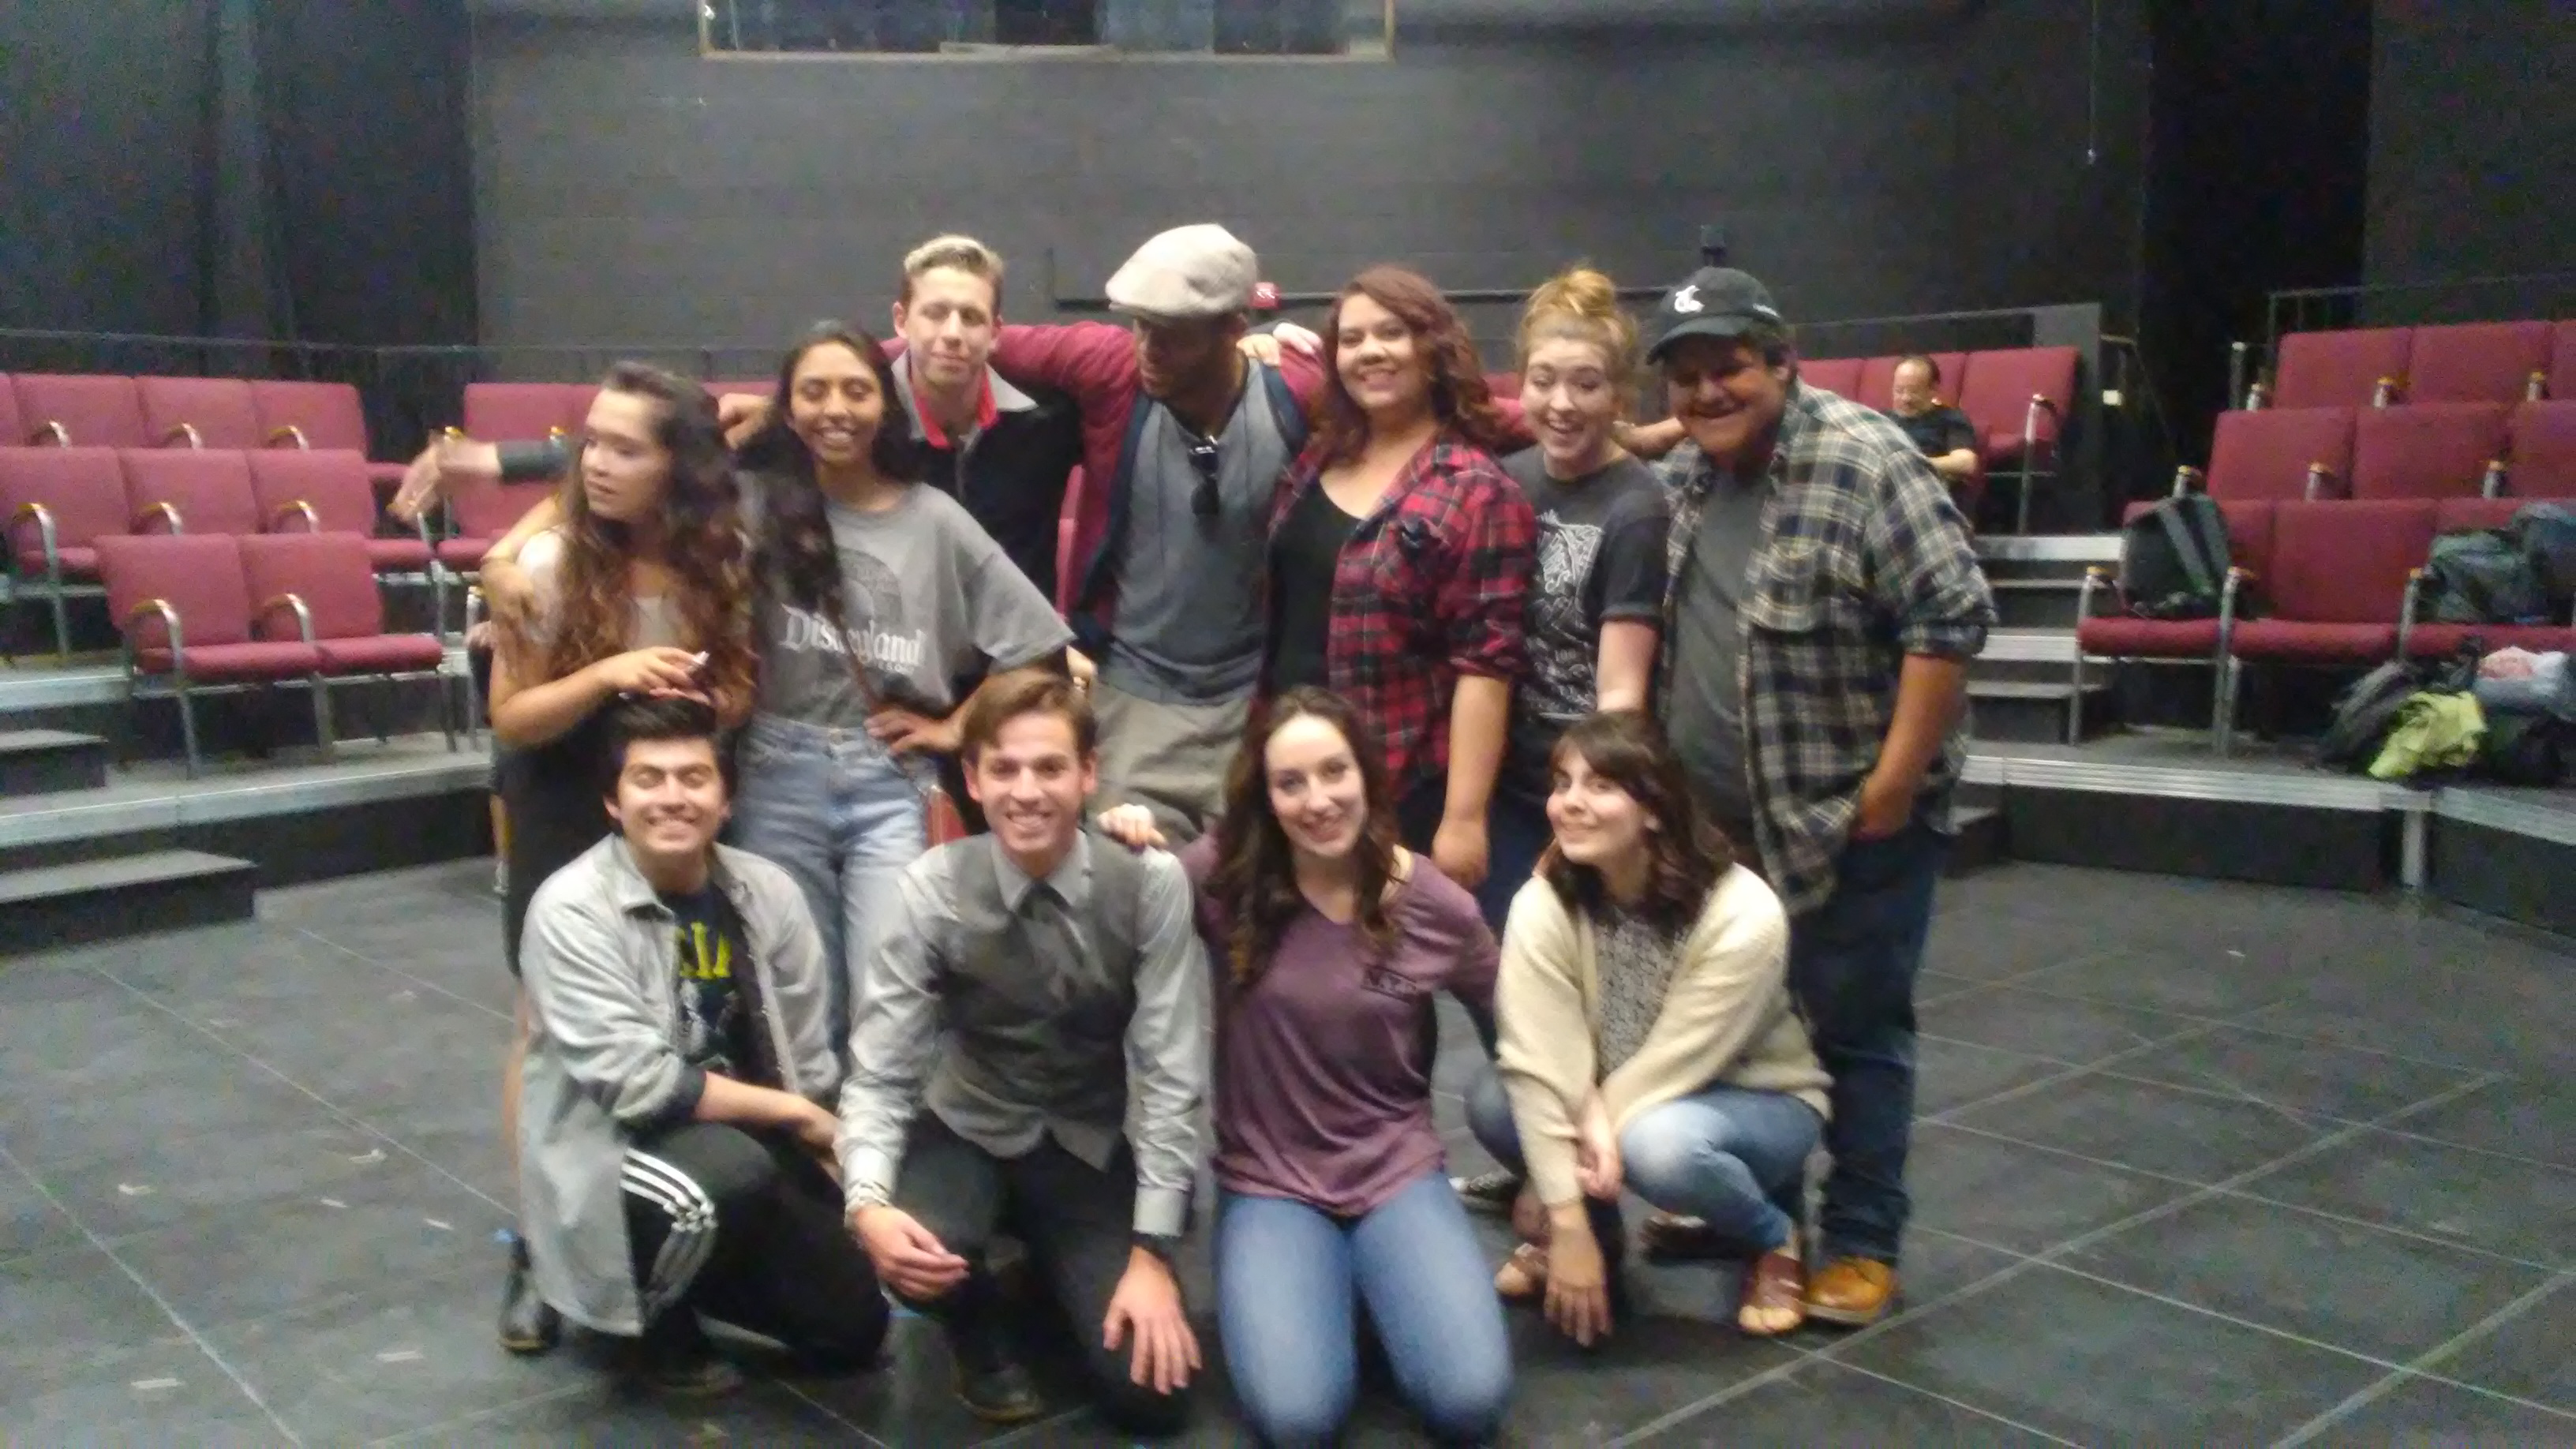 Theatre works showcases plays about hope